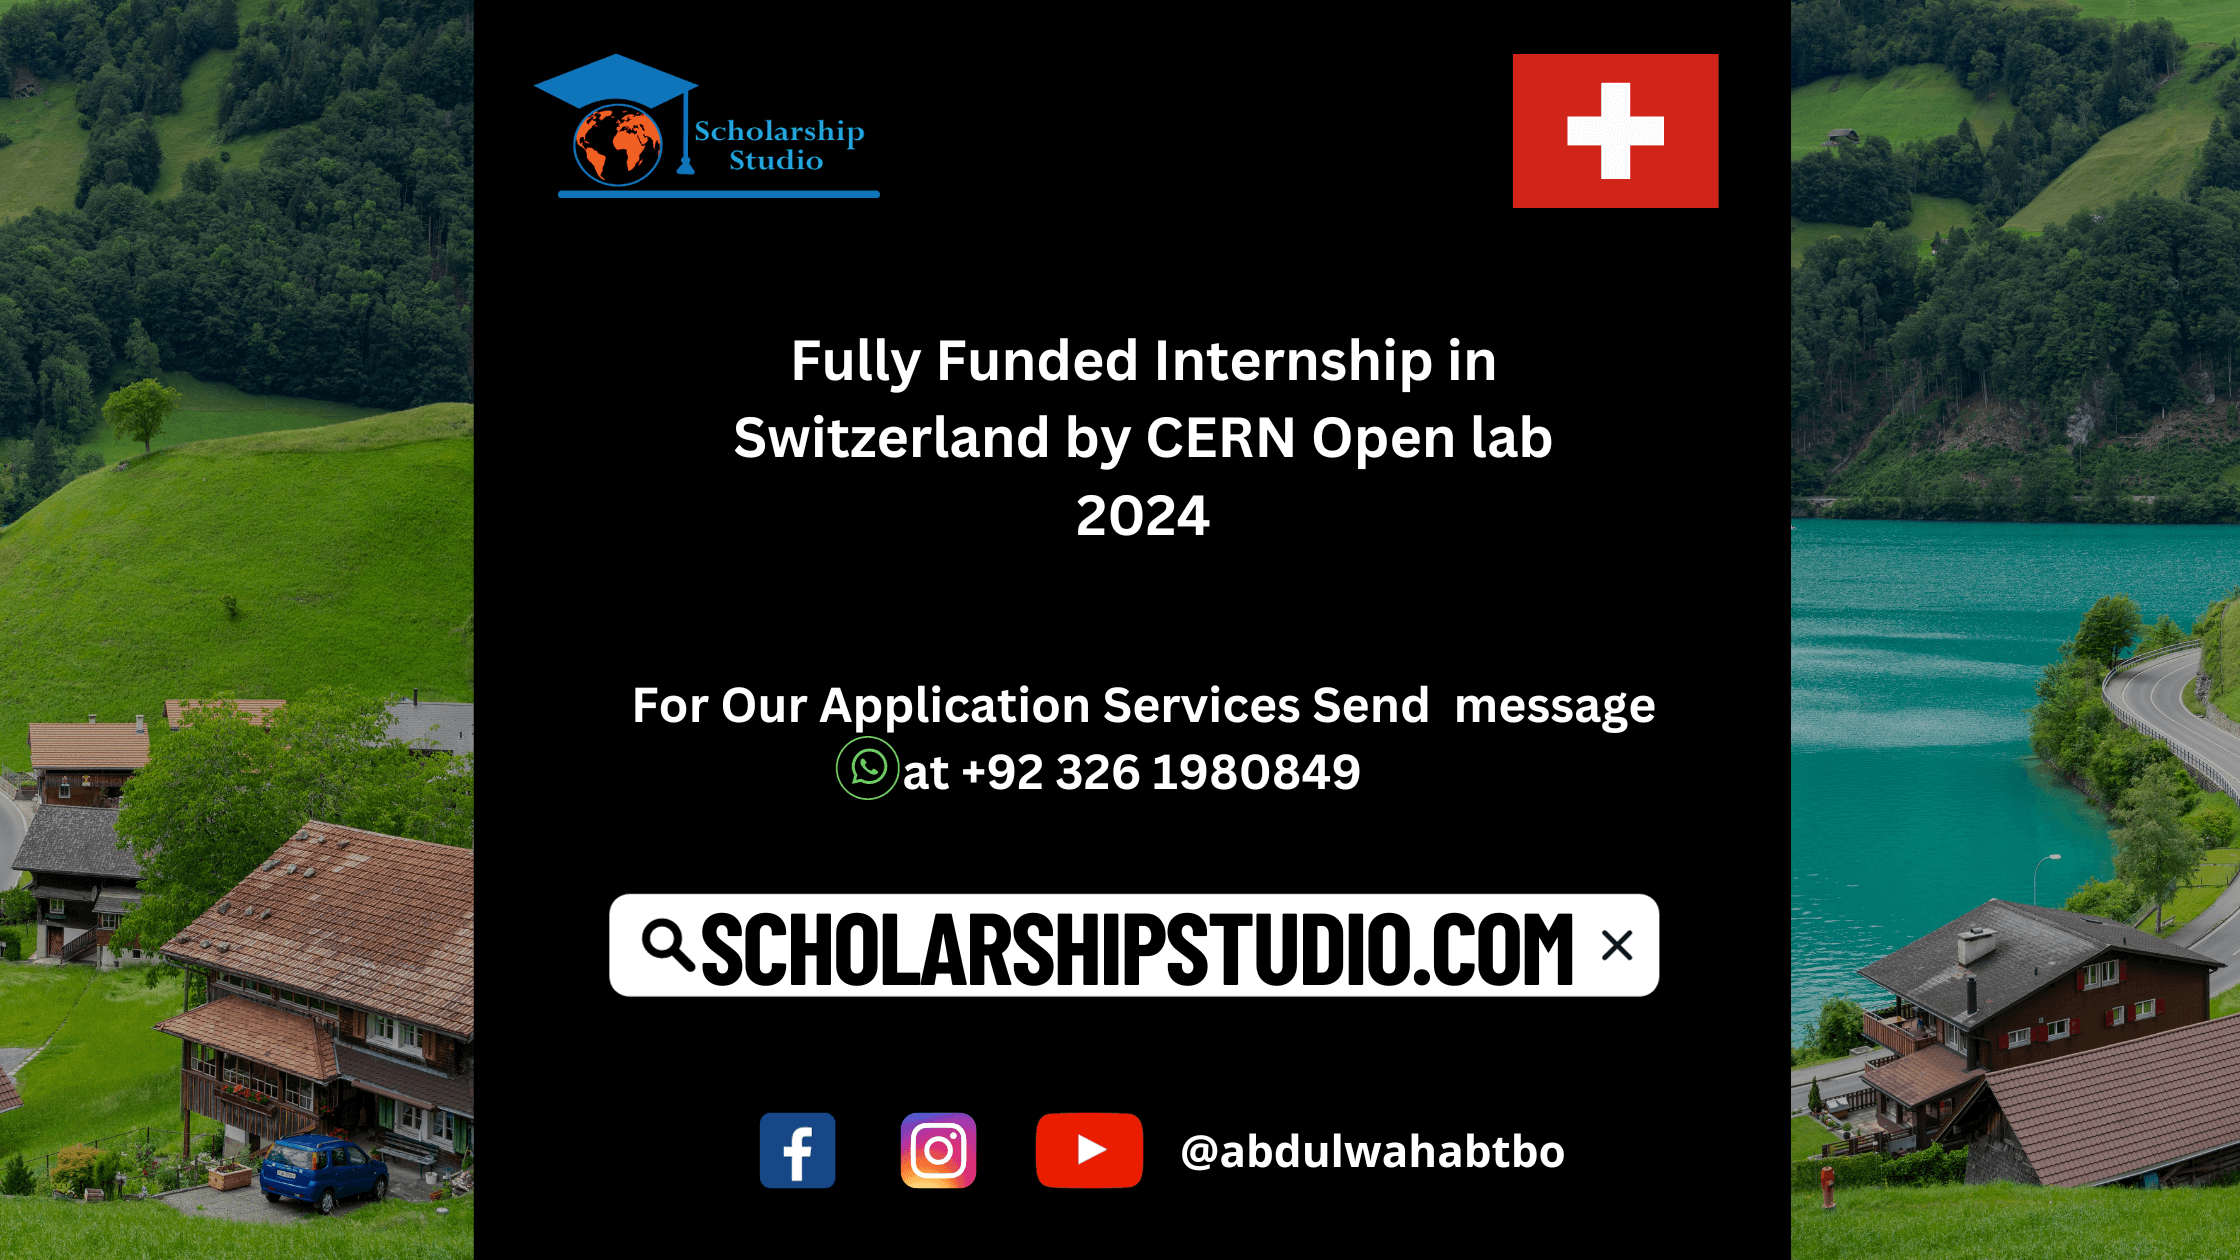 Fully Funded Internship in Switzerland by CERN Open lab 2024